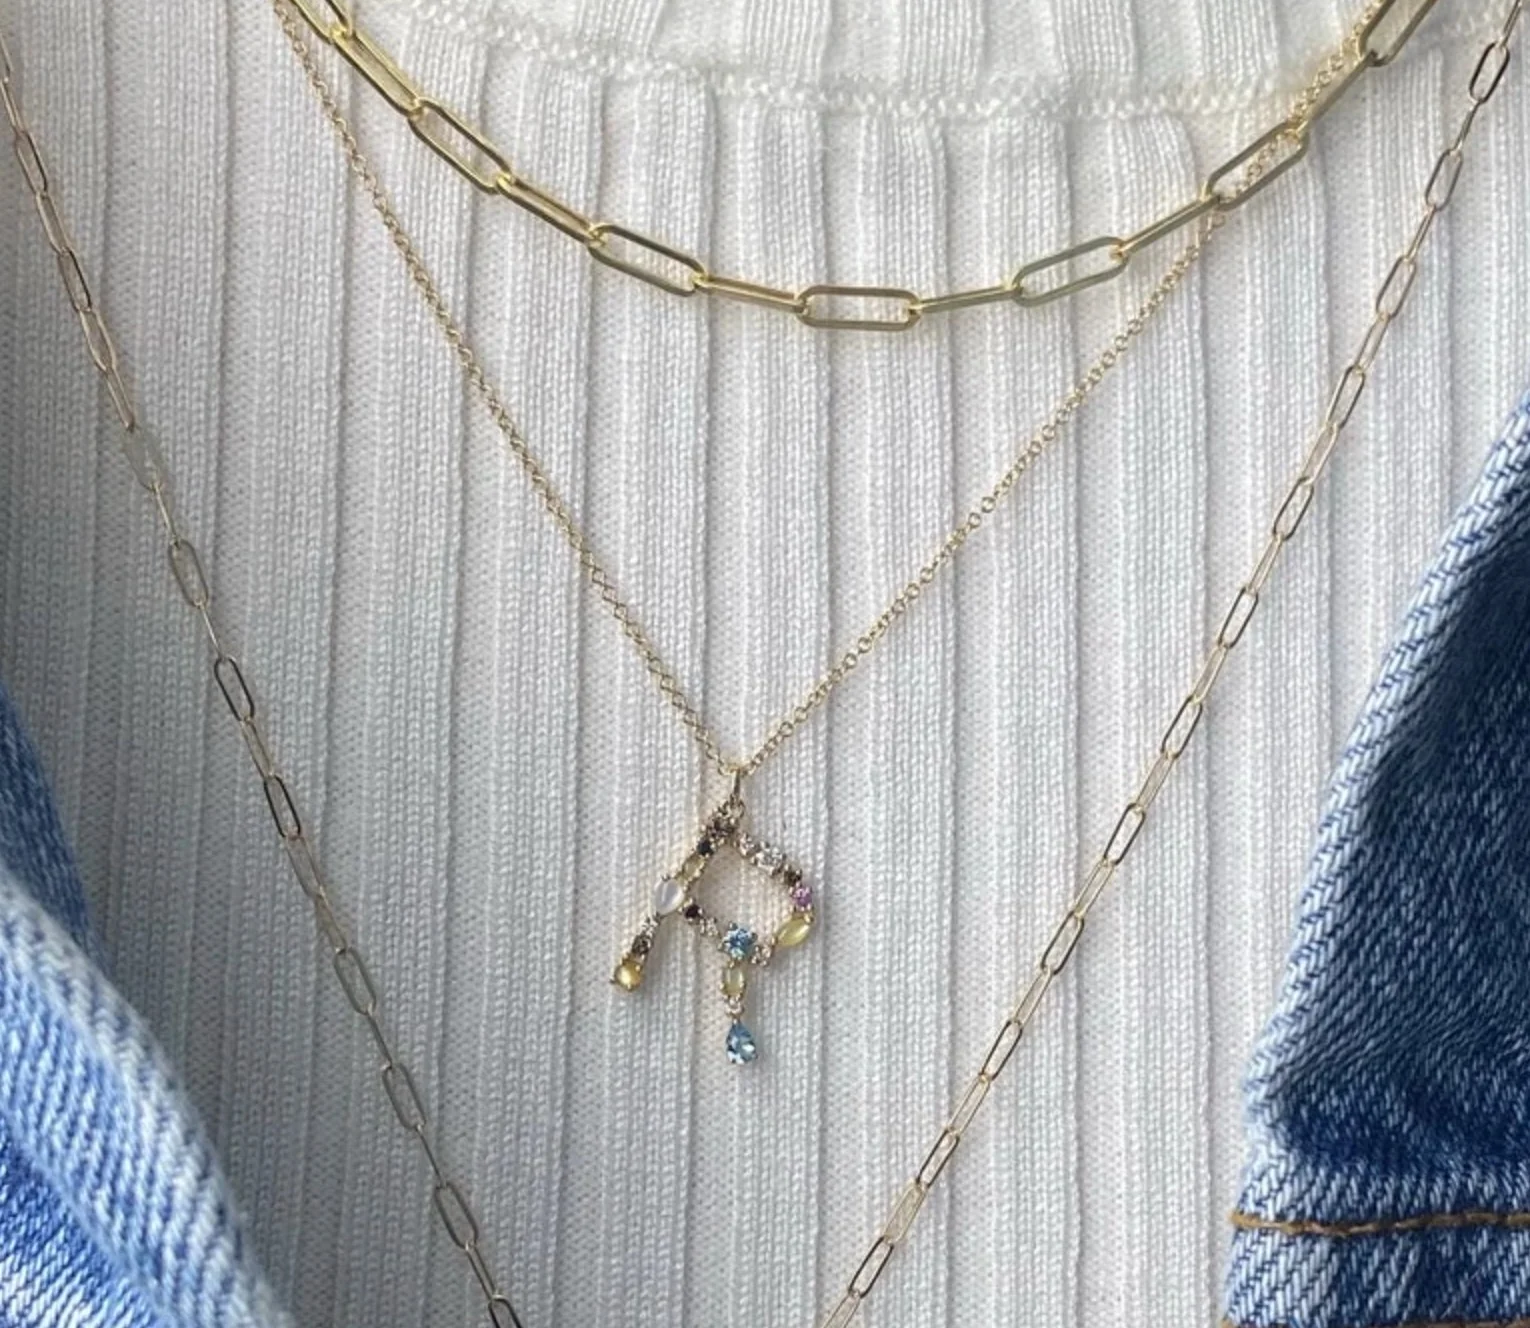 a necklaces on a shirt